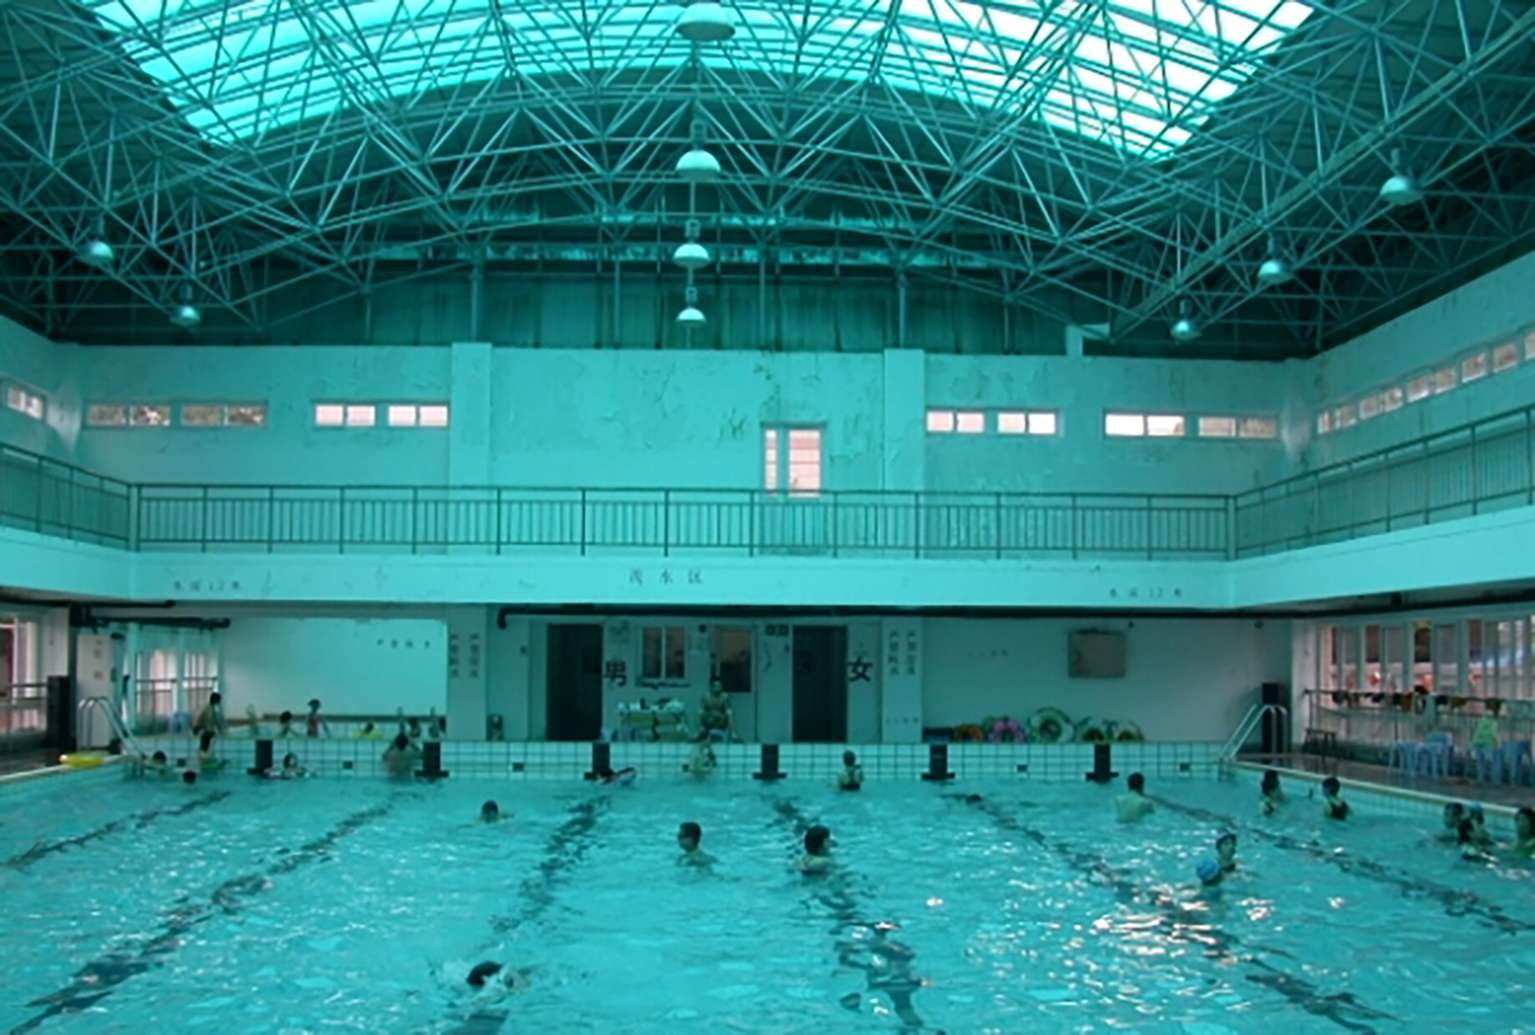 The pool used by the Feiyu swimming club has been closed for tests of its water quality. Photo: SCMP Pictures